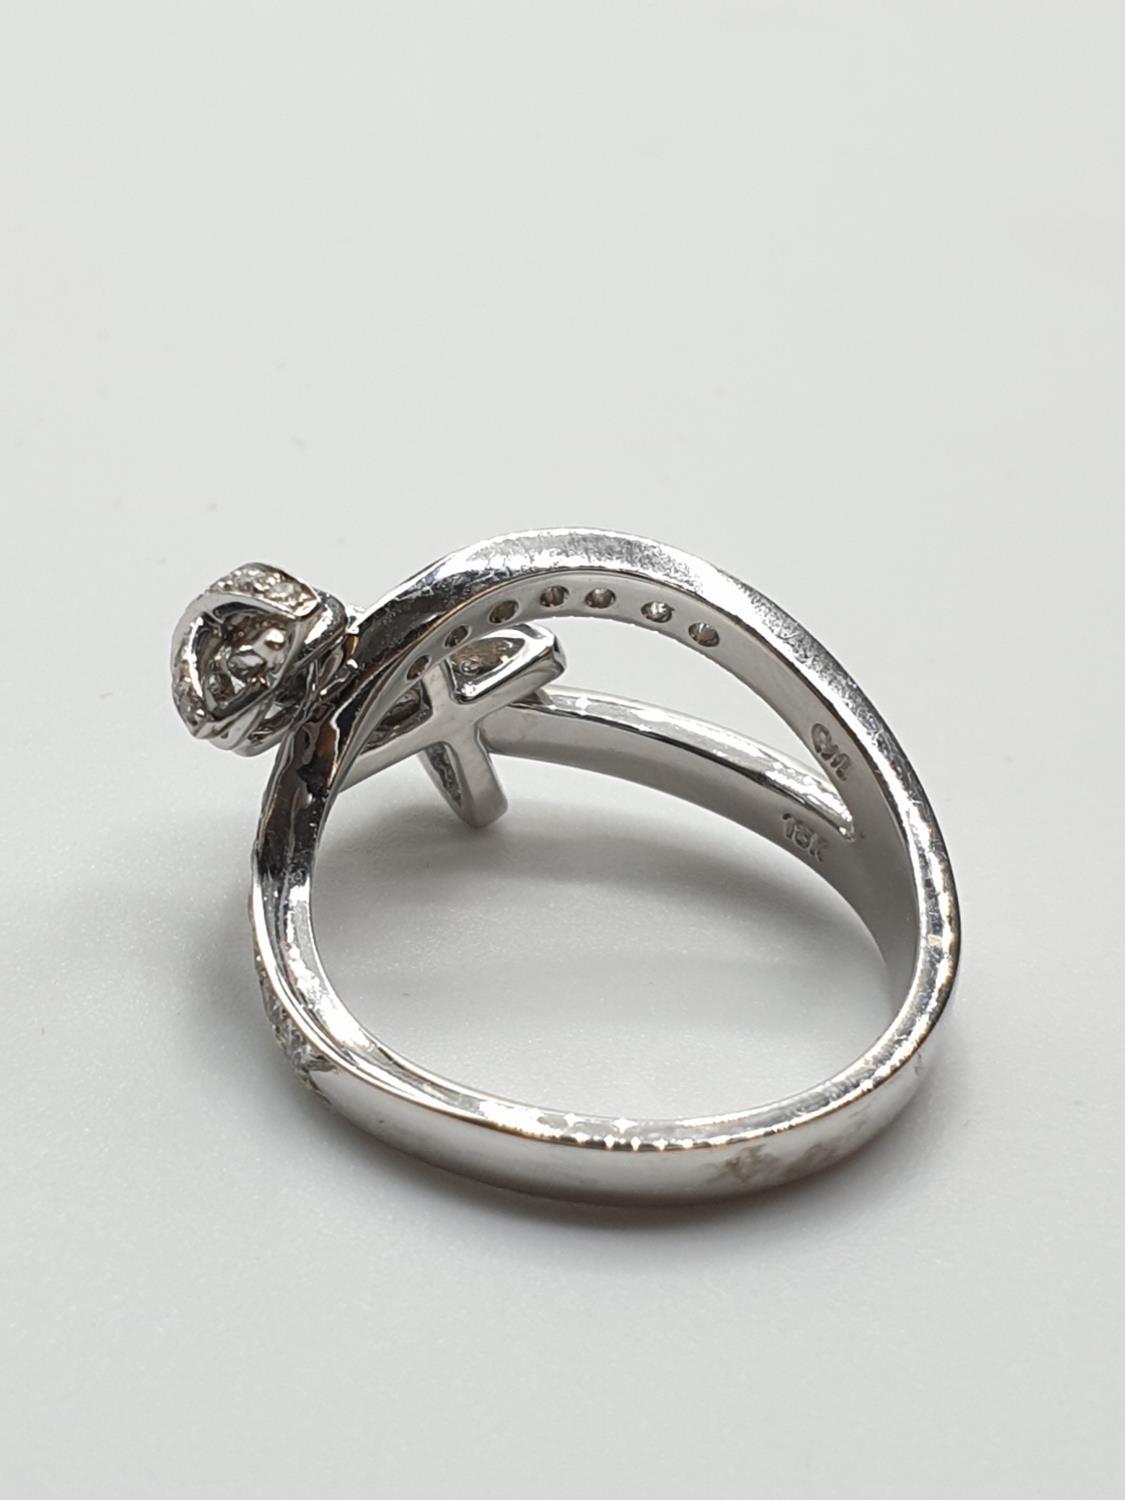 18ct White Gold Diamond Ring, weight 4.7g and approx 0.40ct diamonds, size J/K - Image 4 of 7